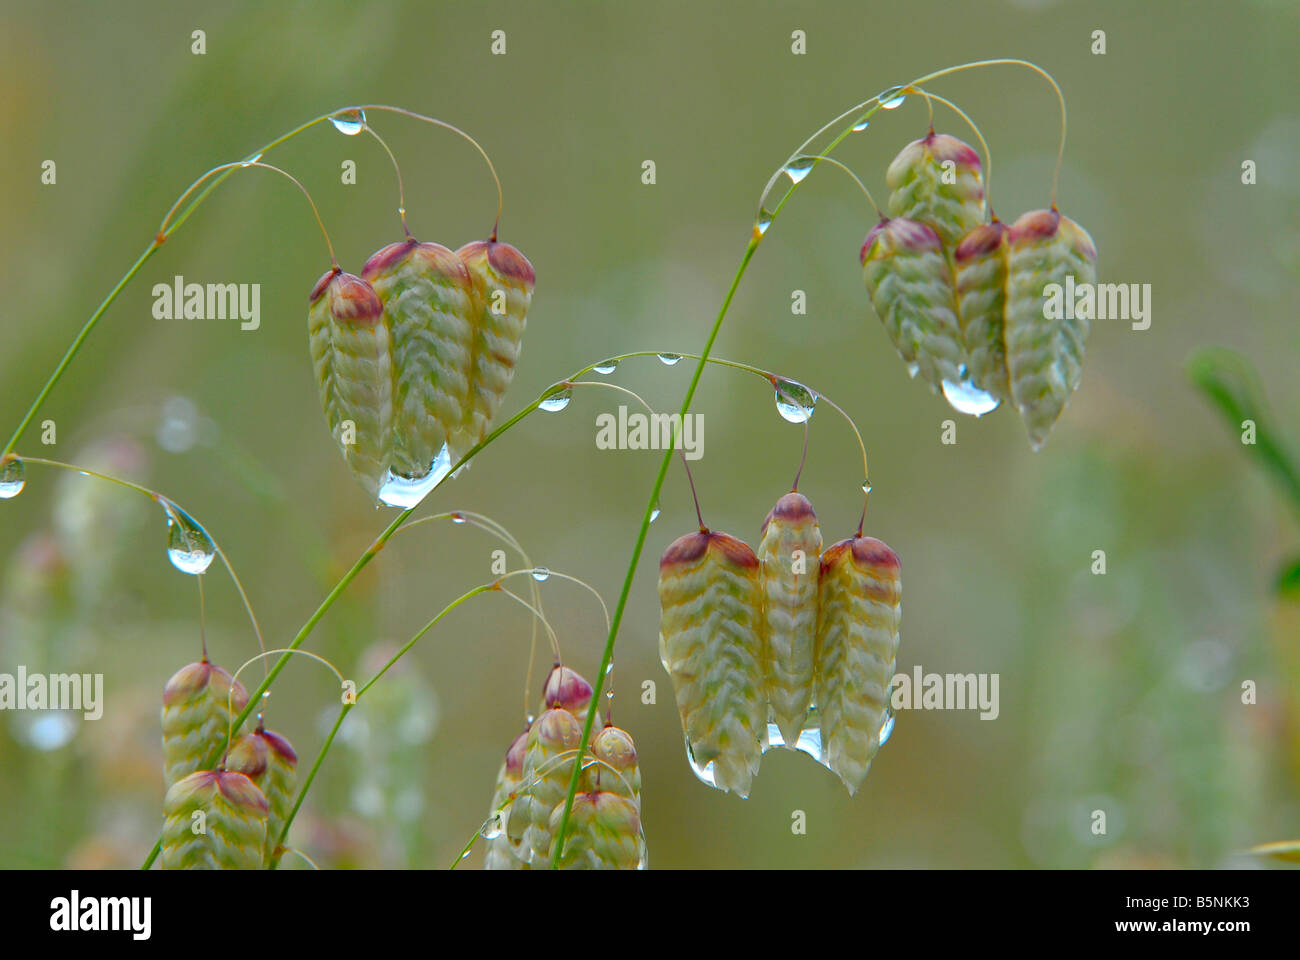 Dew drops on grass seeds in the Western Cape, South Africa. This is springtime, before the dry Mediterranean summers. Stock Photo